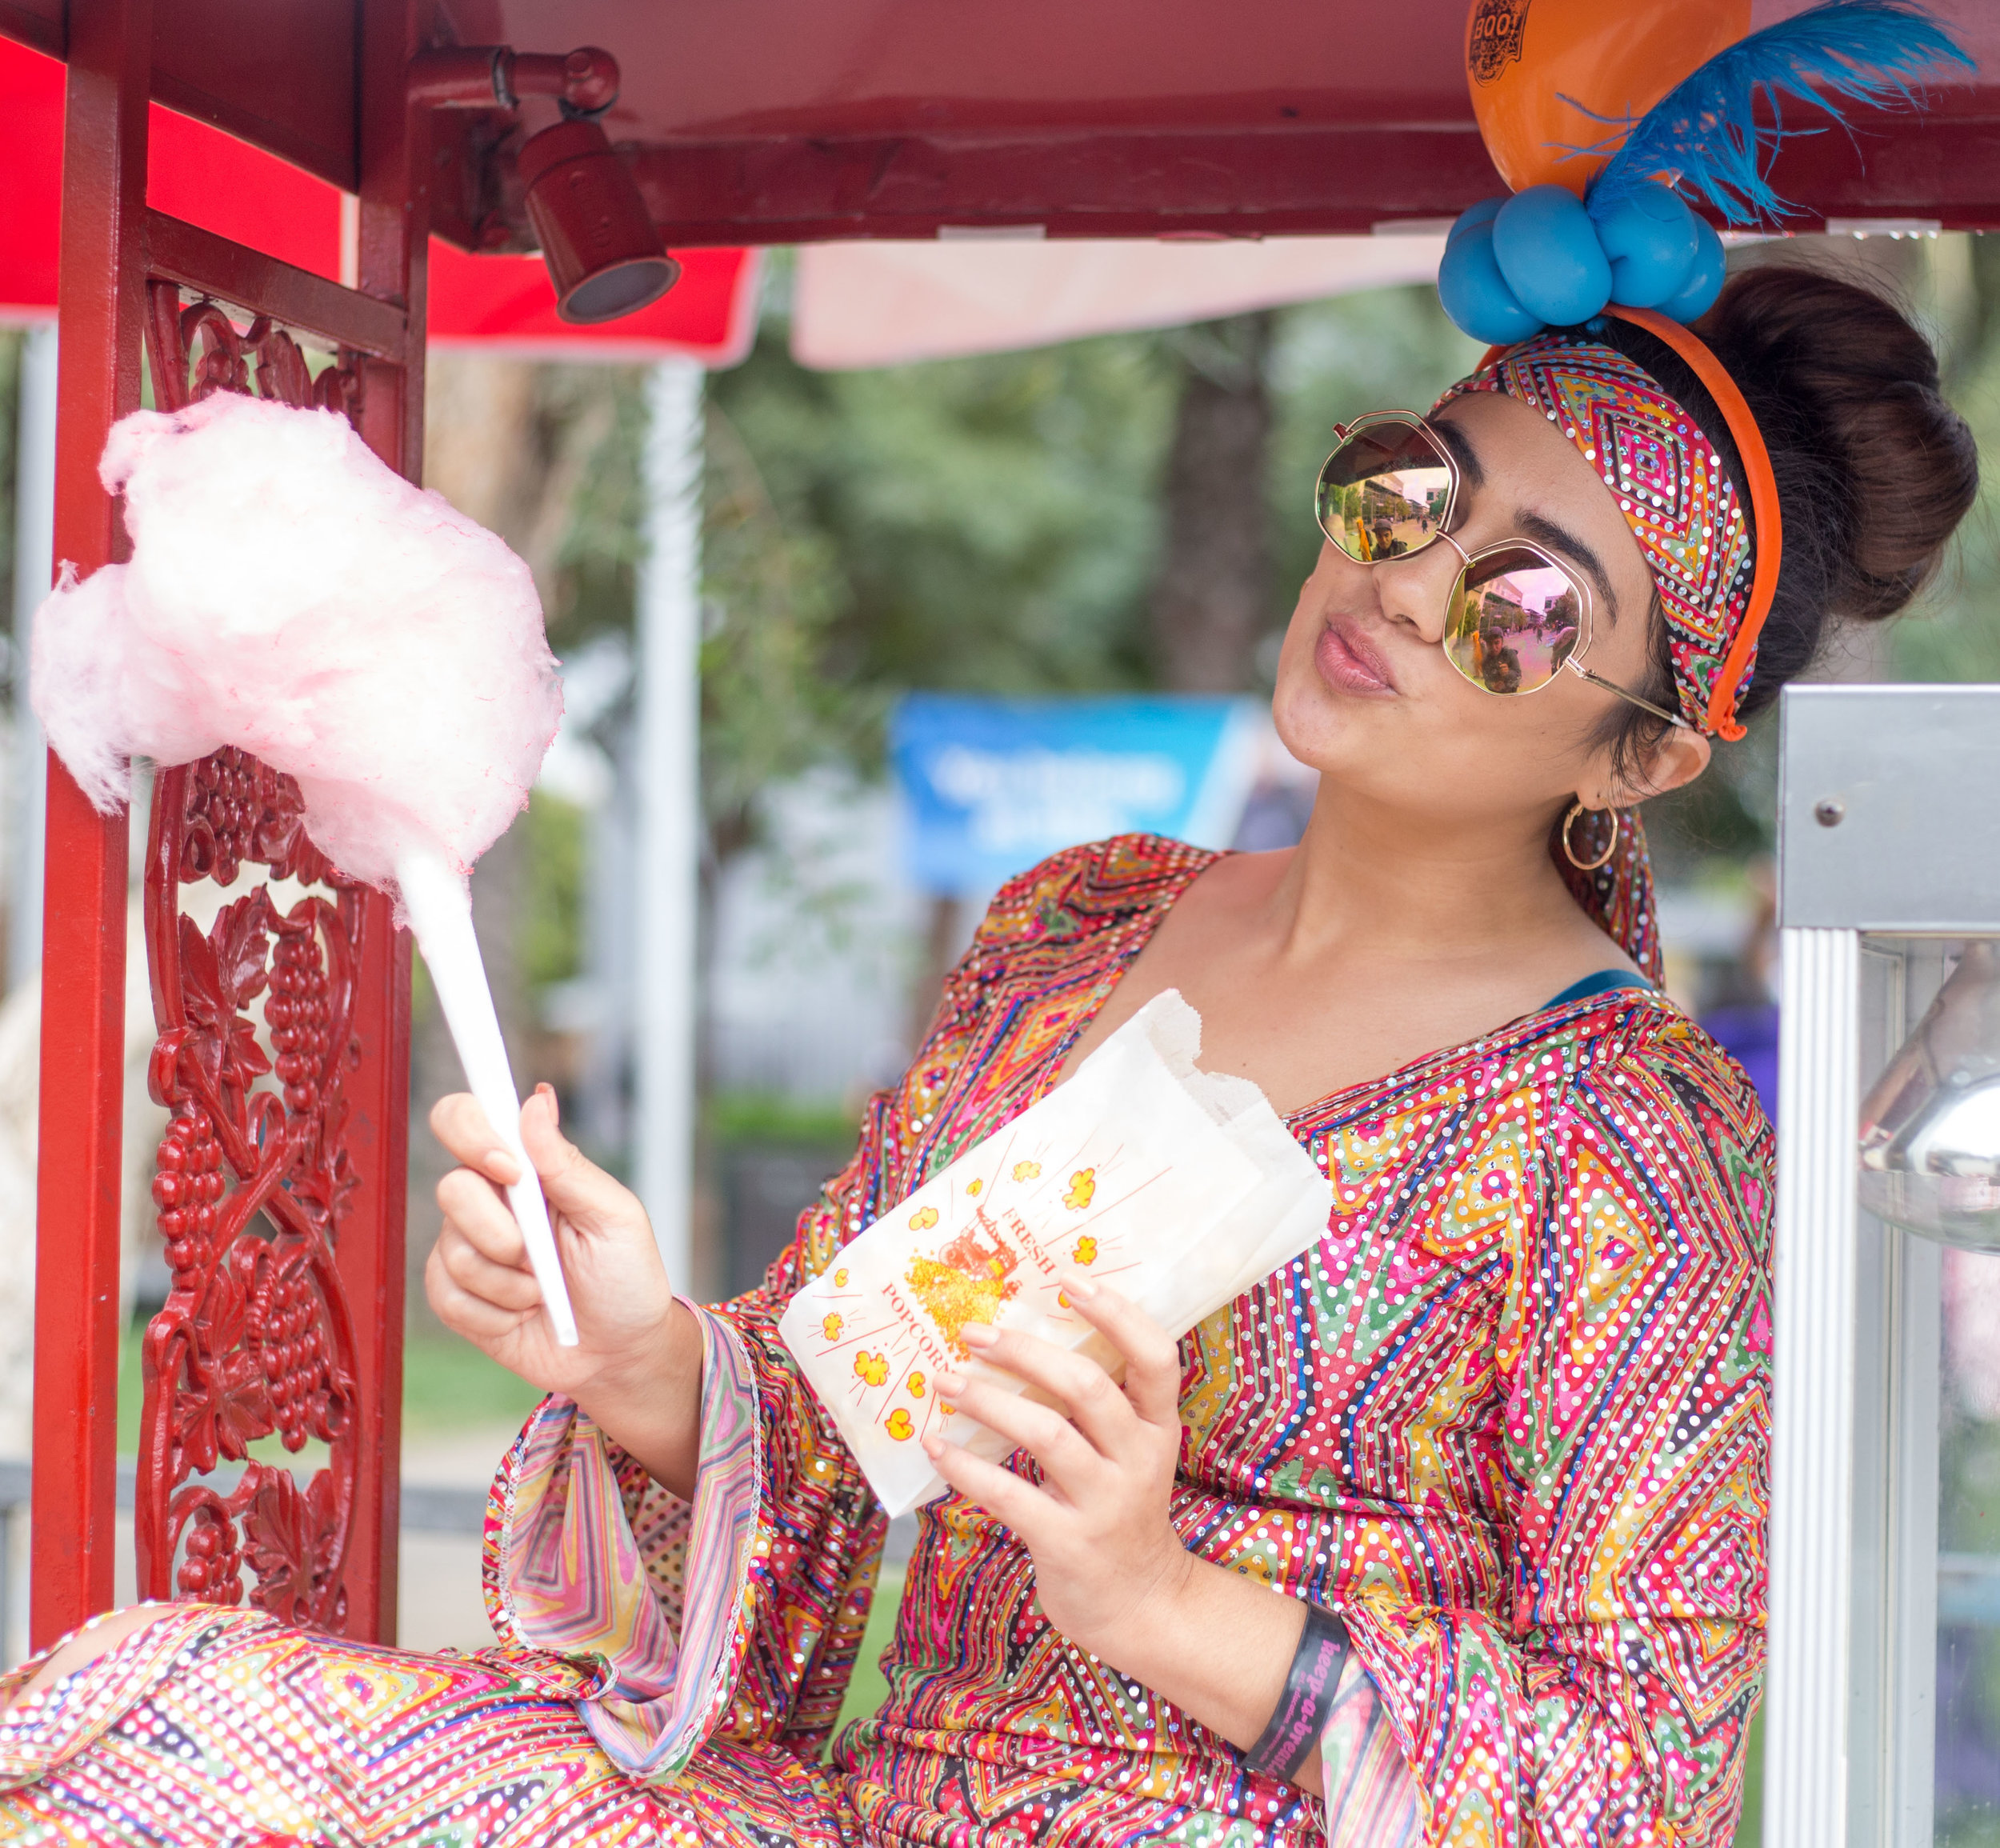  Santa Monica College Buisness Major Leslie Pine is dressed as American singer and actress Cher while she holds free popcorn and cotton candy from the Associated Students' Homecoming Carnival on Halloween on Tuesday, October 31st 2017 at the Santa Mo